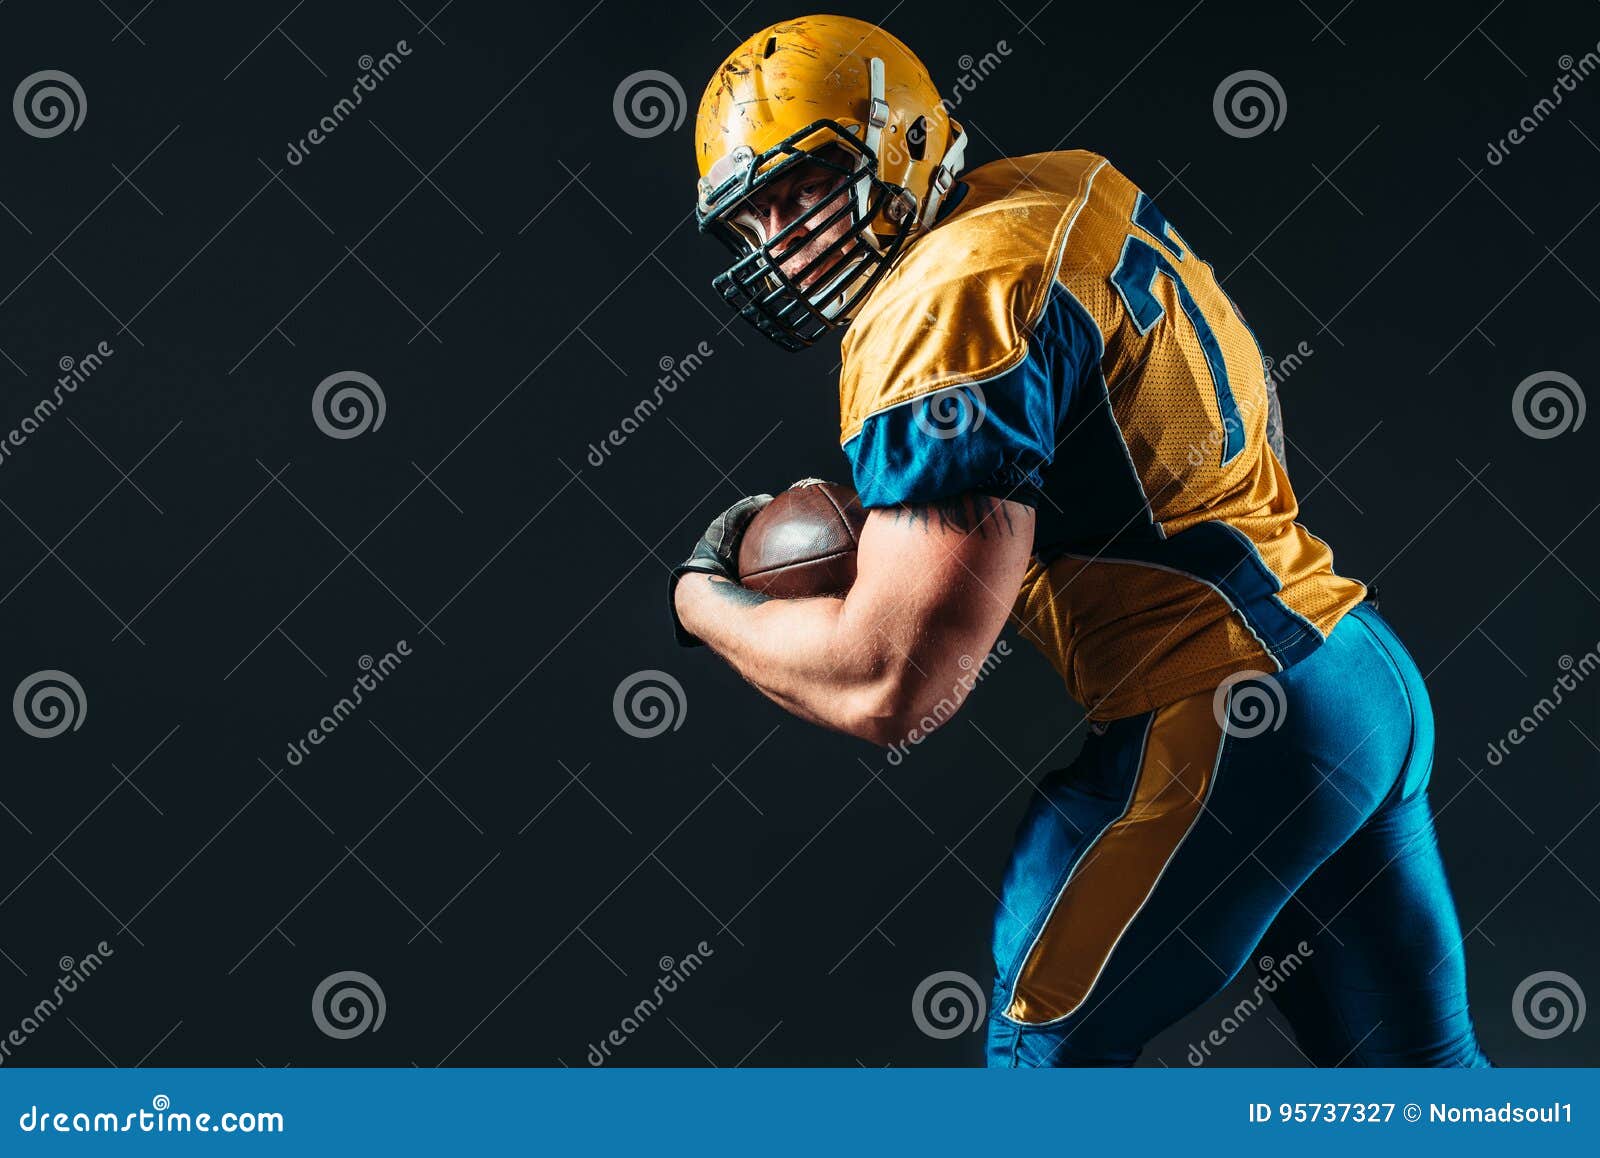 american football offensive player with ball